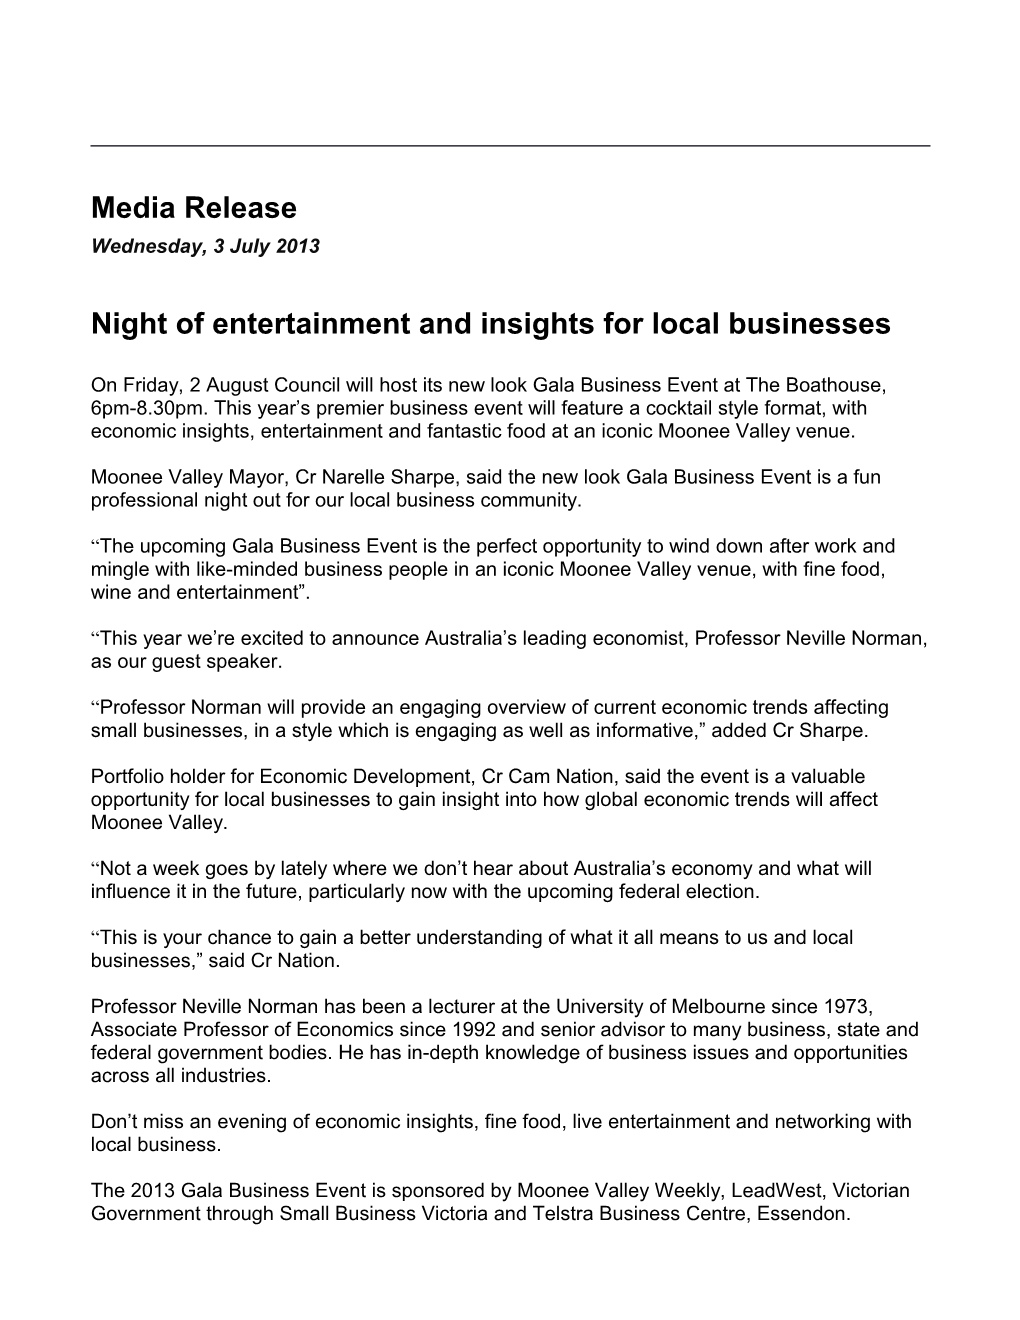 Night of Entertainment and Insights for Local Businesses